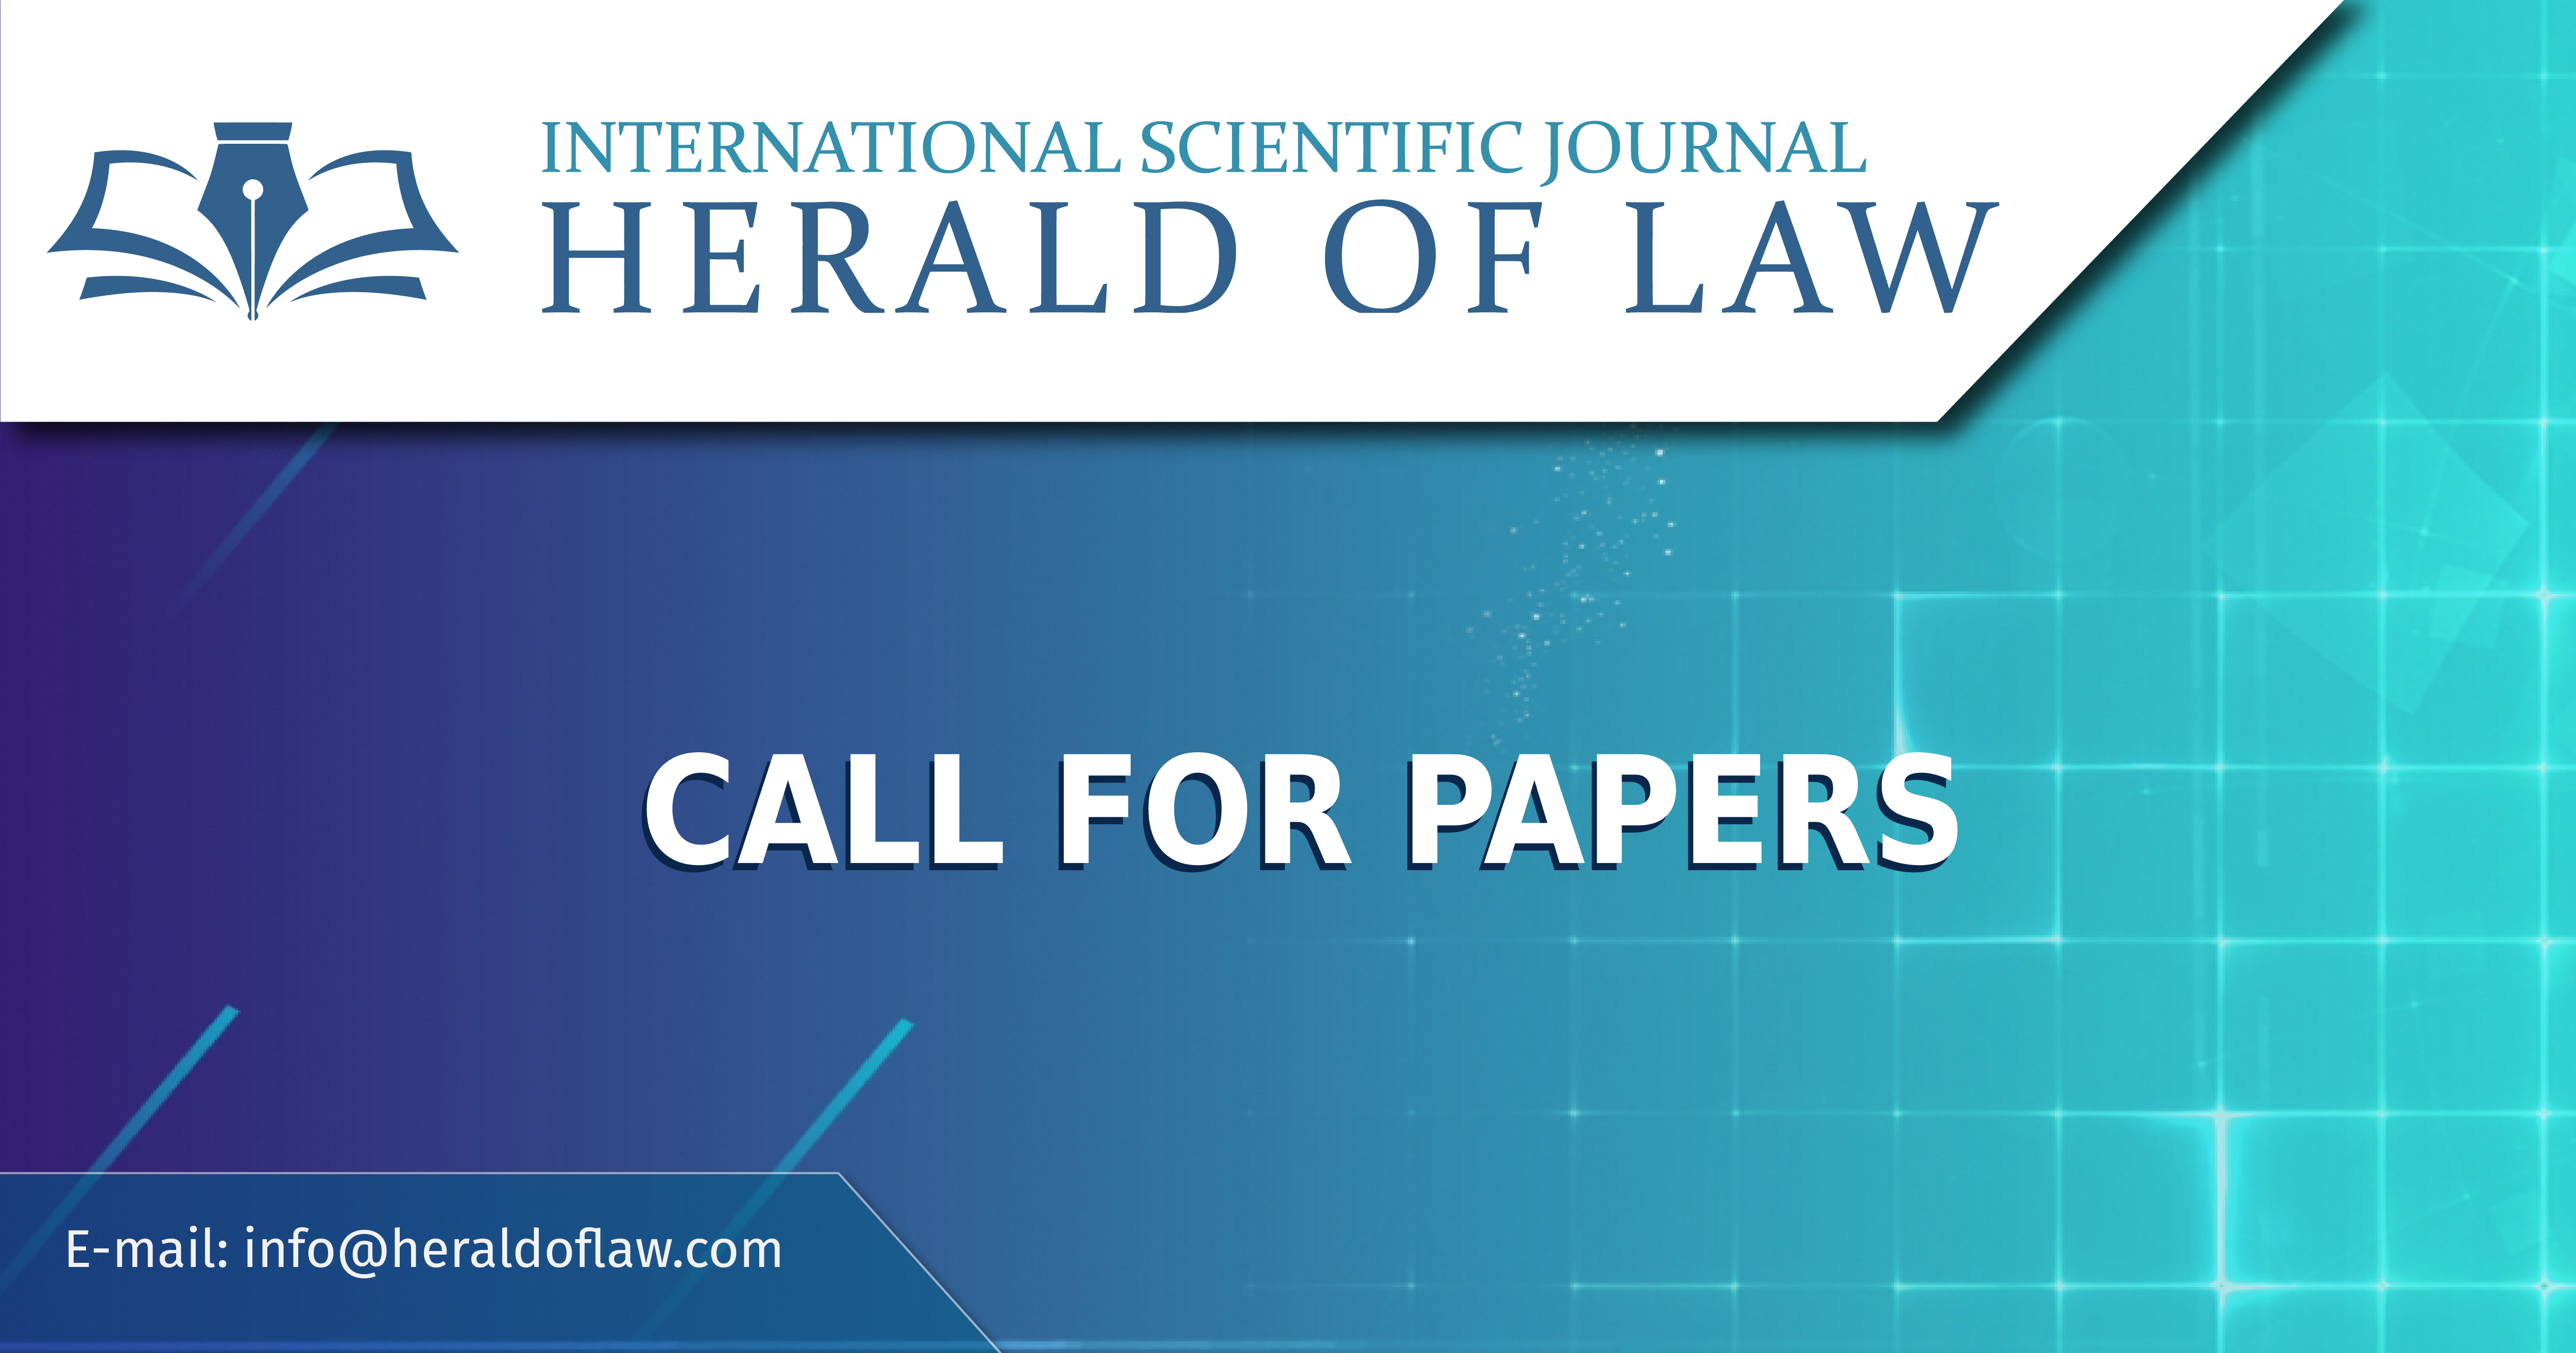 Call for papers for the second issue of scholarly journal Herald of Law